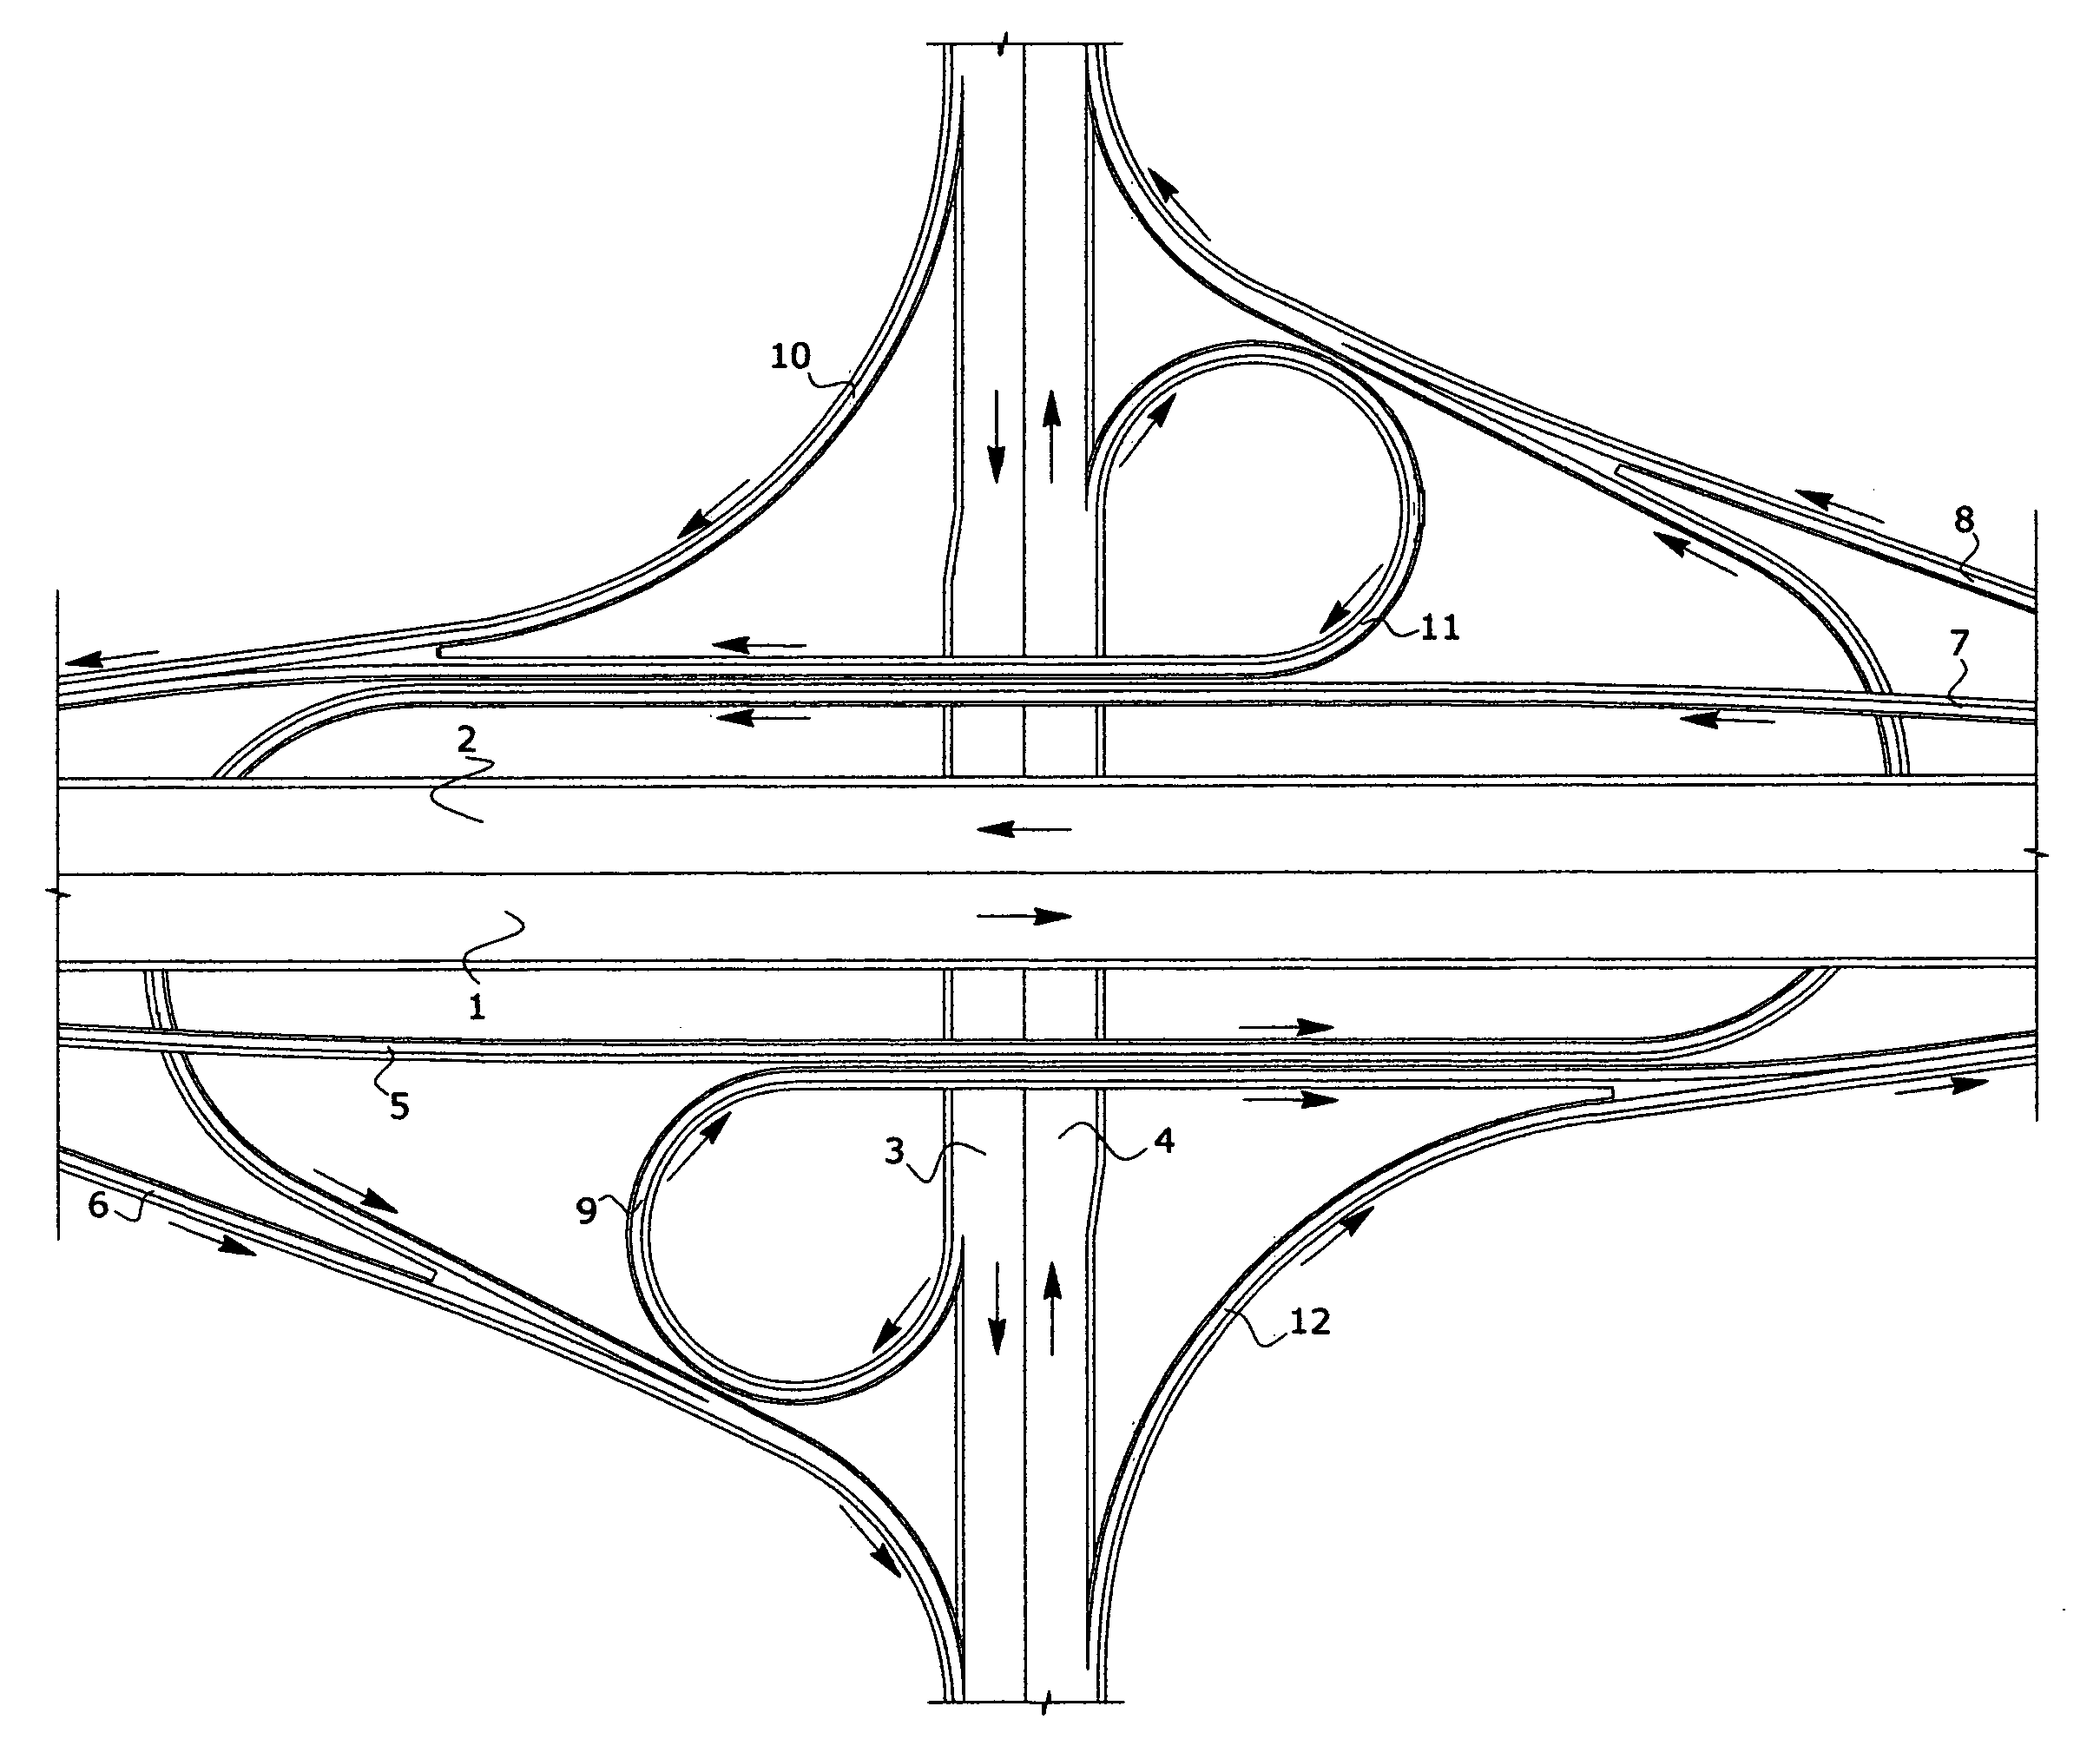 Weaving free two level cloverleaf type interchange for a highway crossing over a street